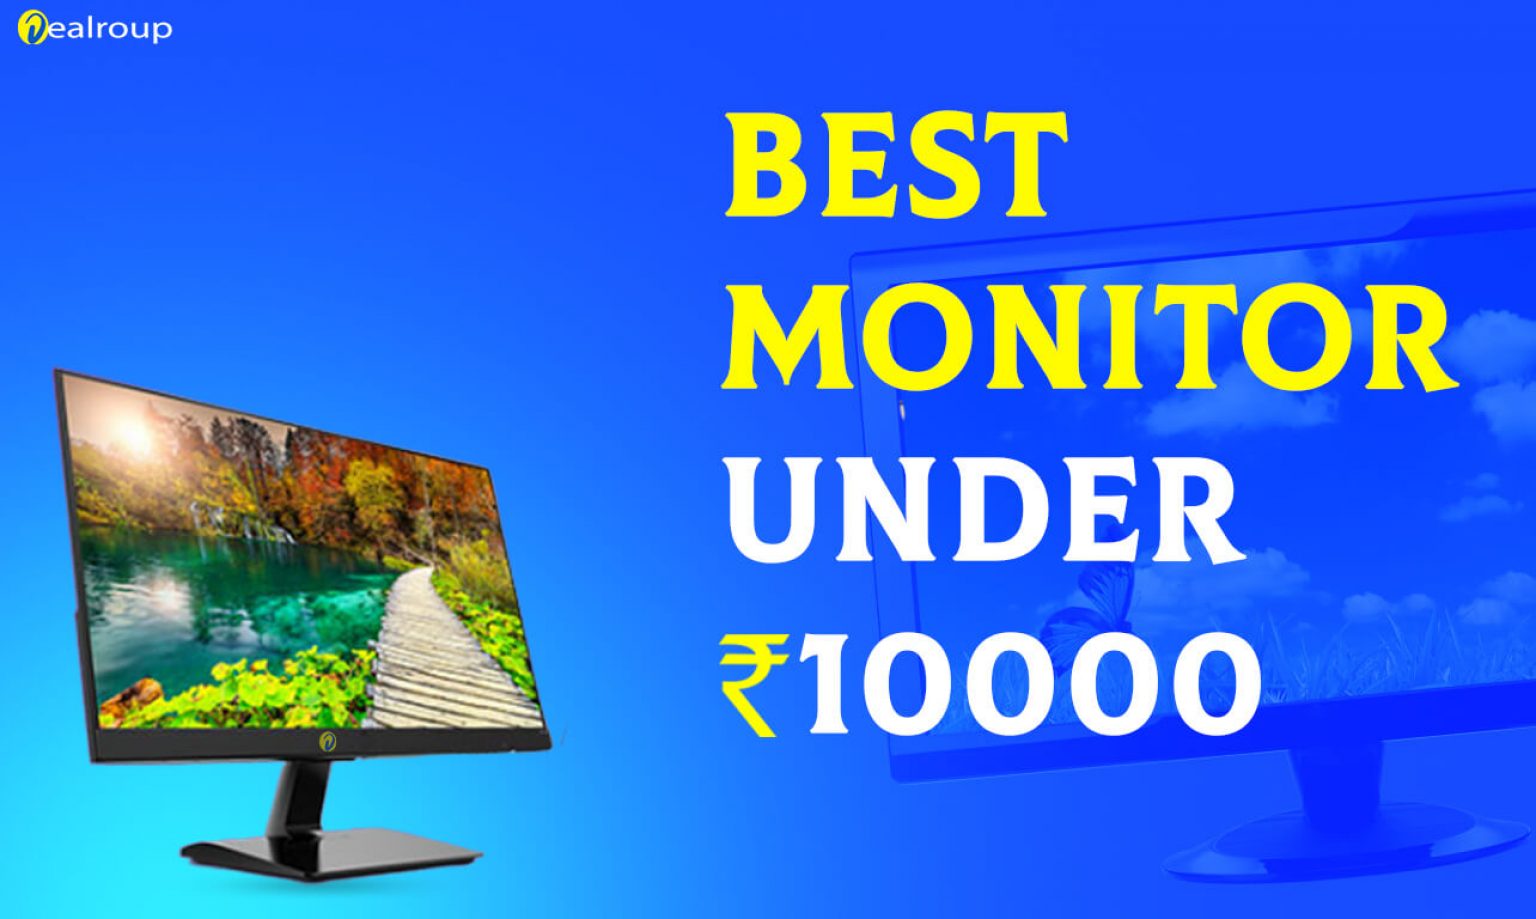 Top 10 Best Monitor Under 10000 in India | Review, Buying Guide (2021)